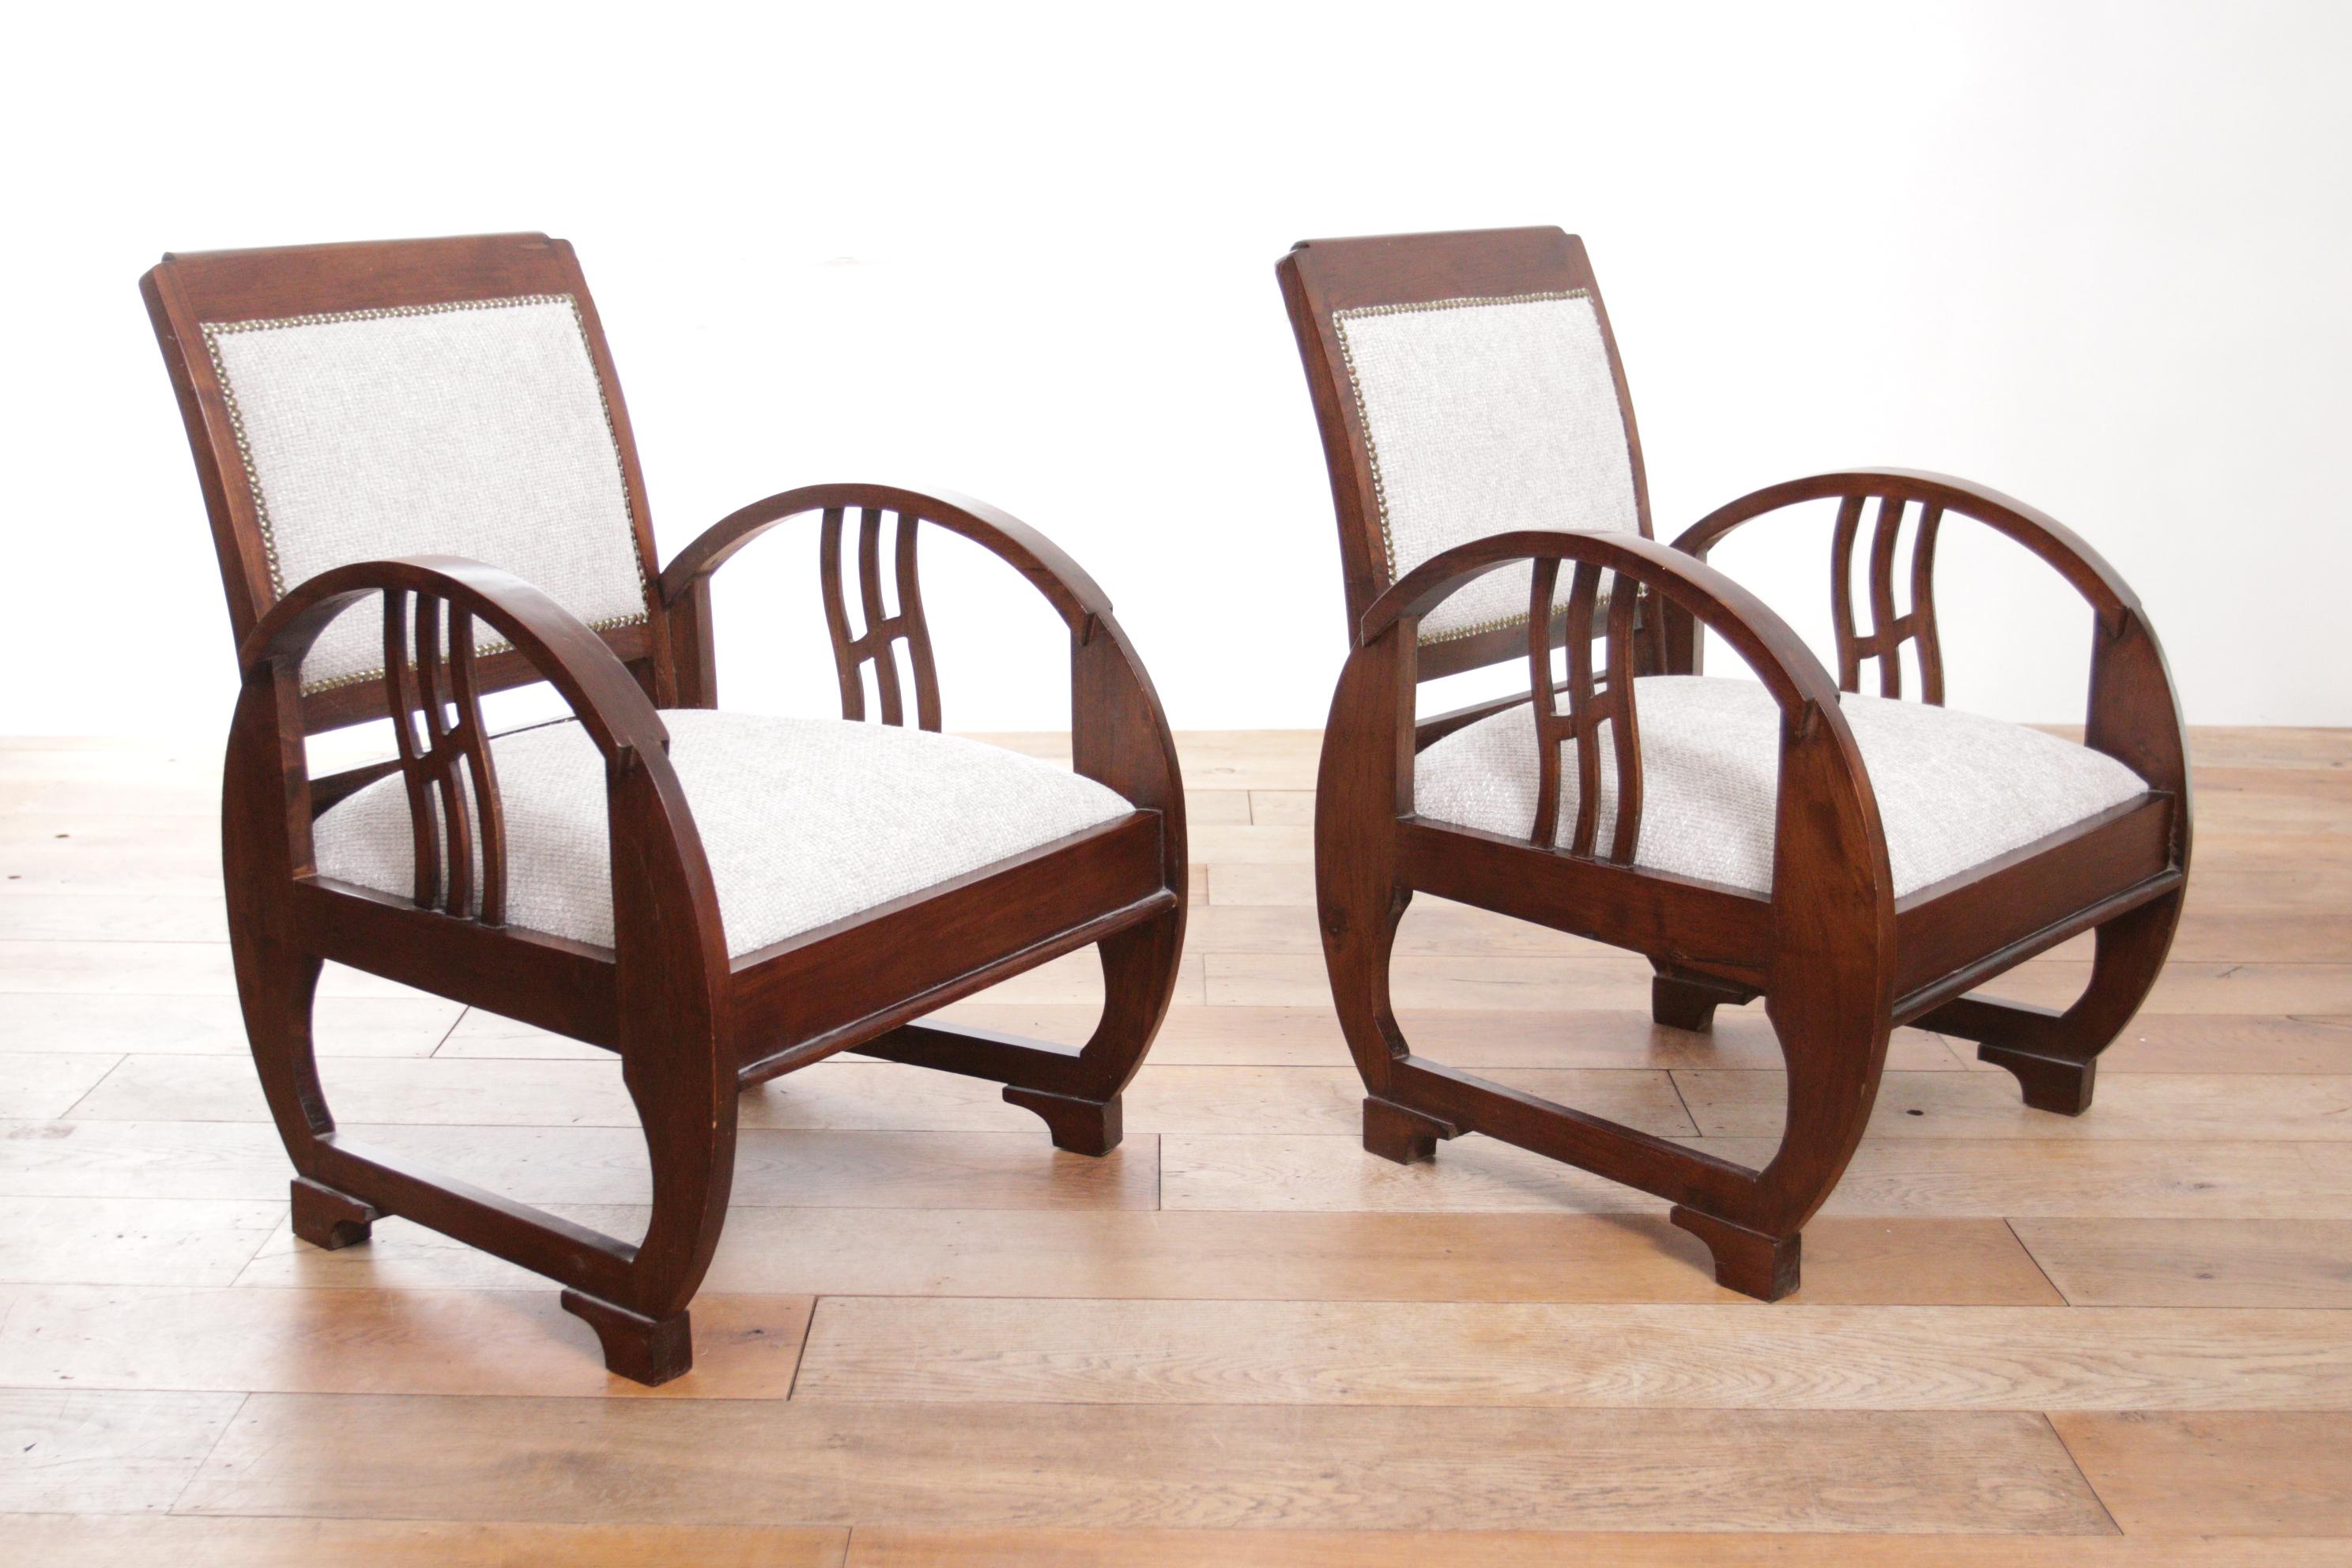 If you are looking for a pair of elegant and comfortable chairs to add some charm and style to your living room, you might want to consider these two exclusive art deco vintage French wooden armchairs. 
These chairs were made around 1930, and they